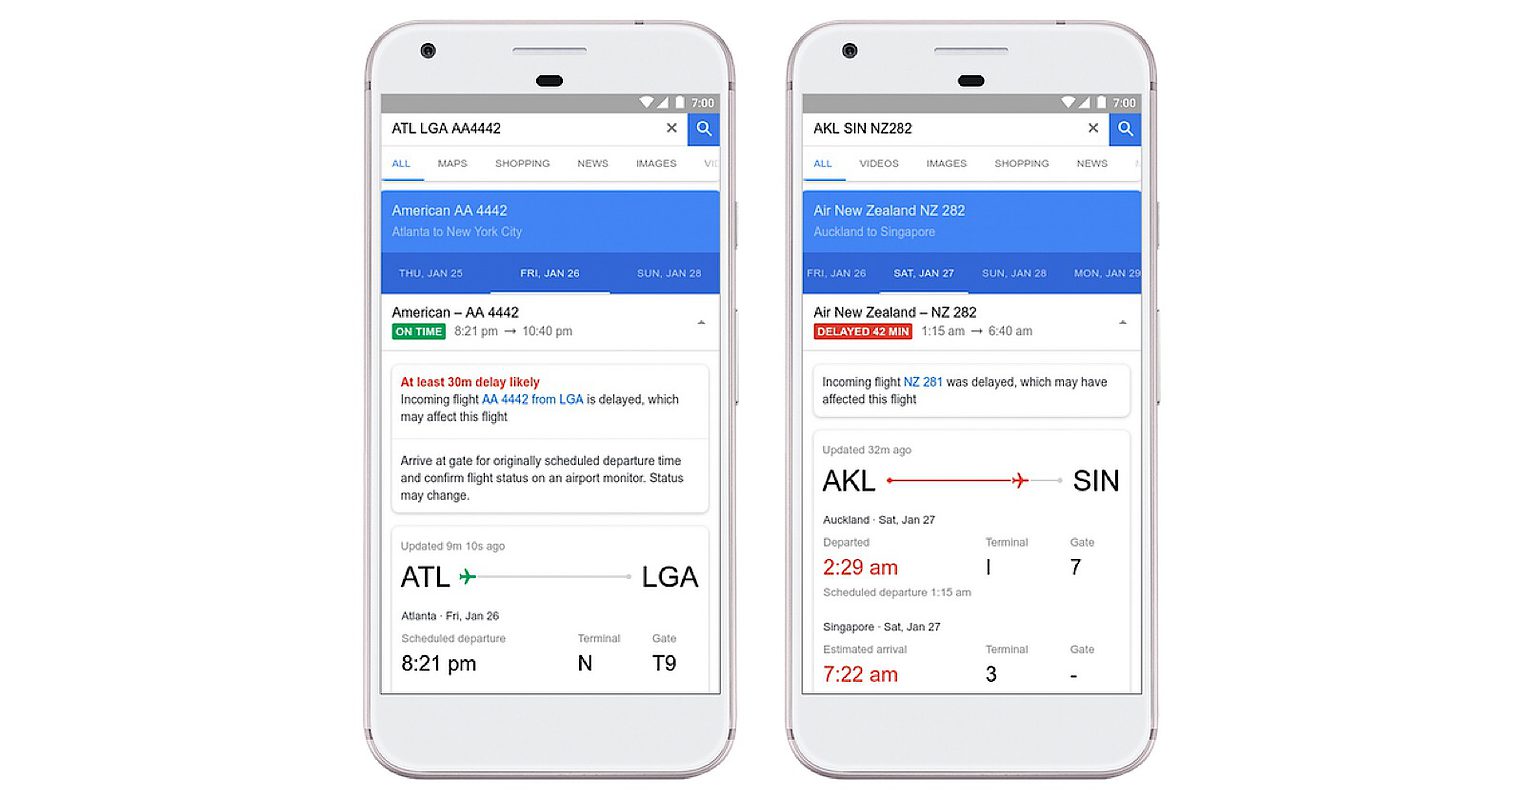 Google Flights to Find Cheaper Fares, Give Reason for Delays